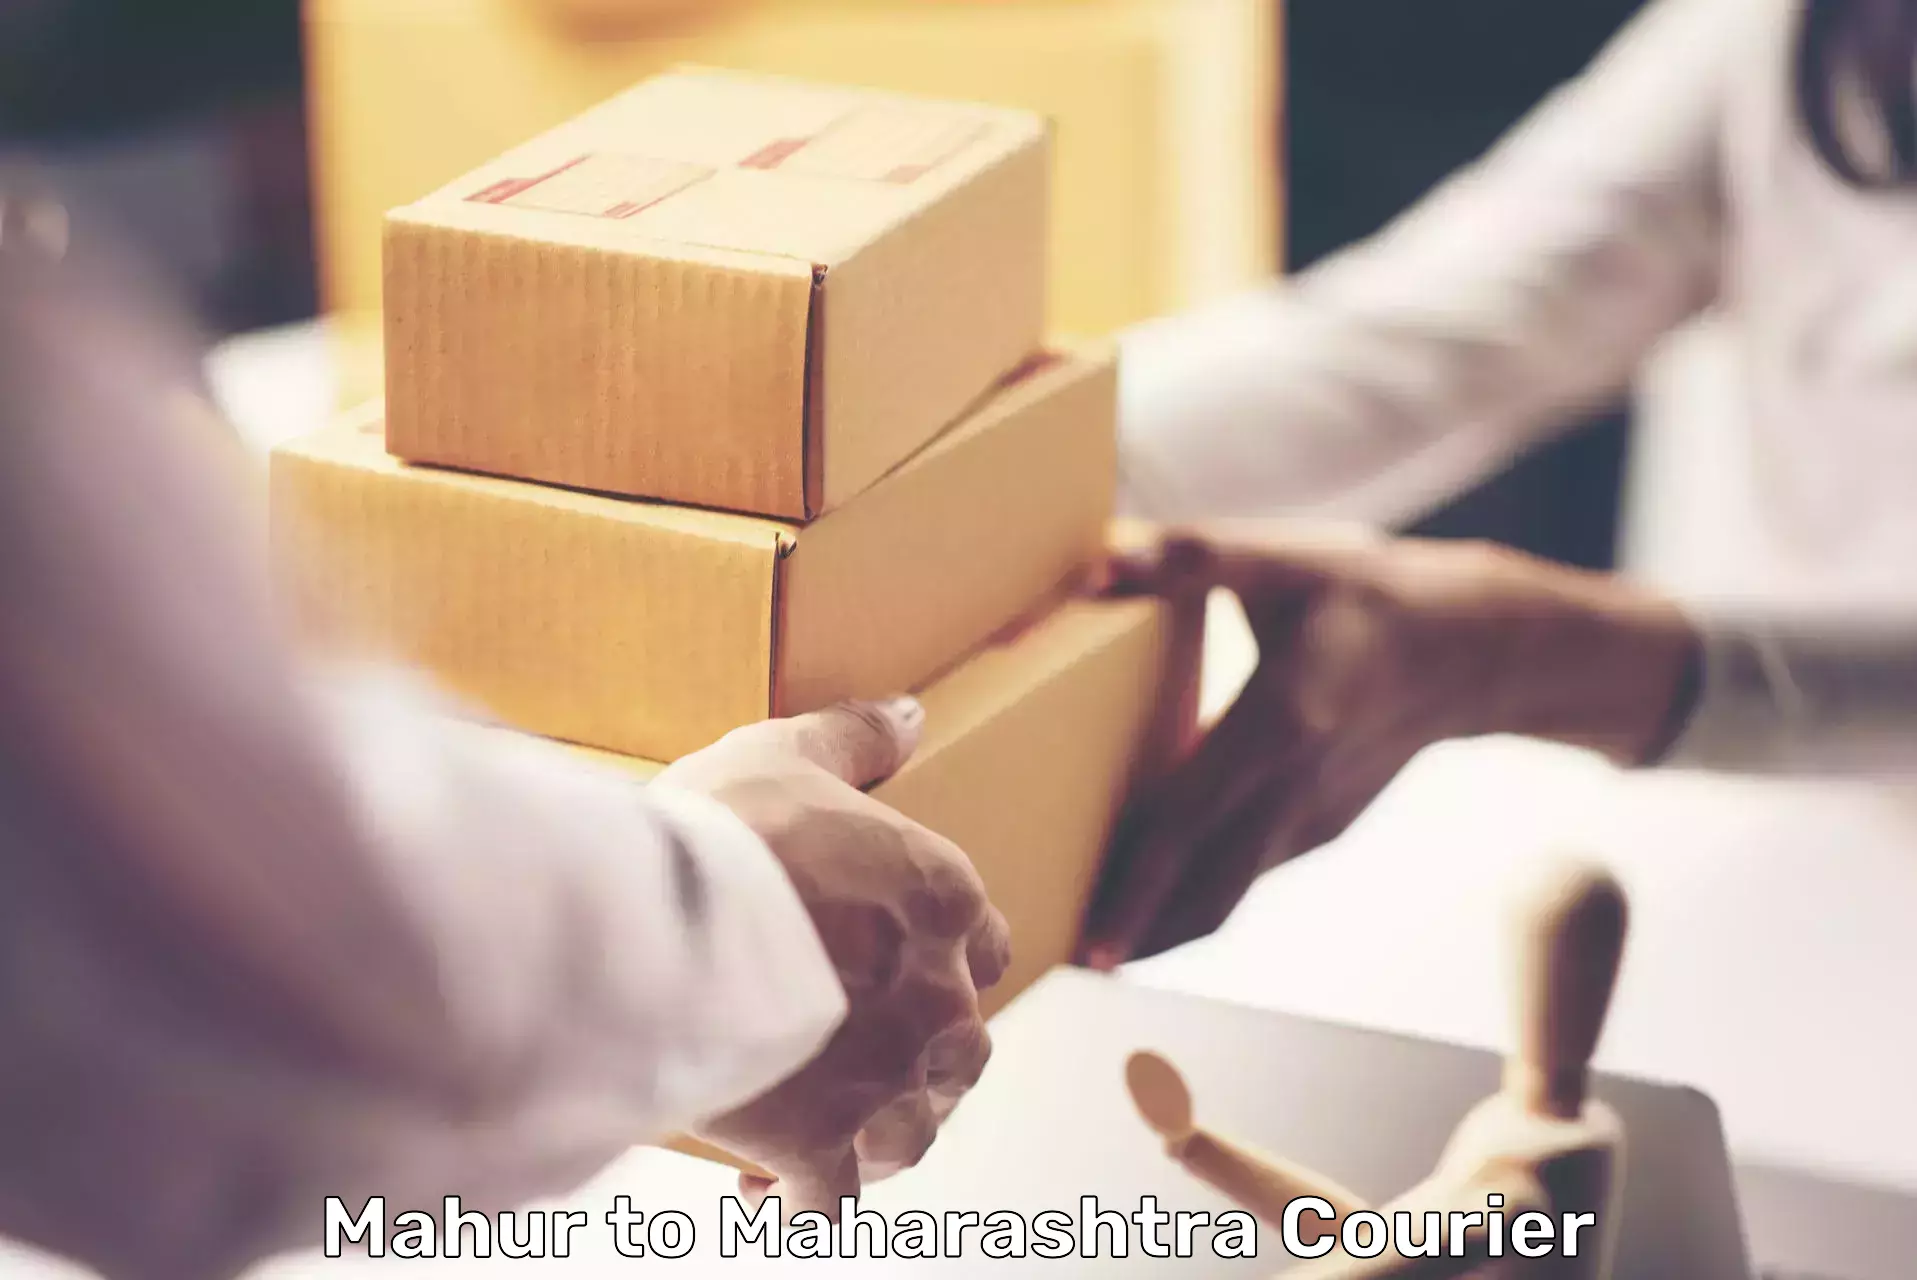 State-of-the-art courier technology Mahur to Akot